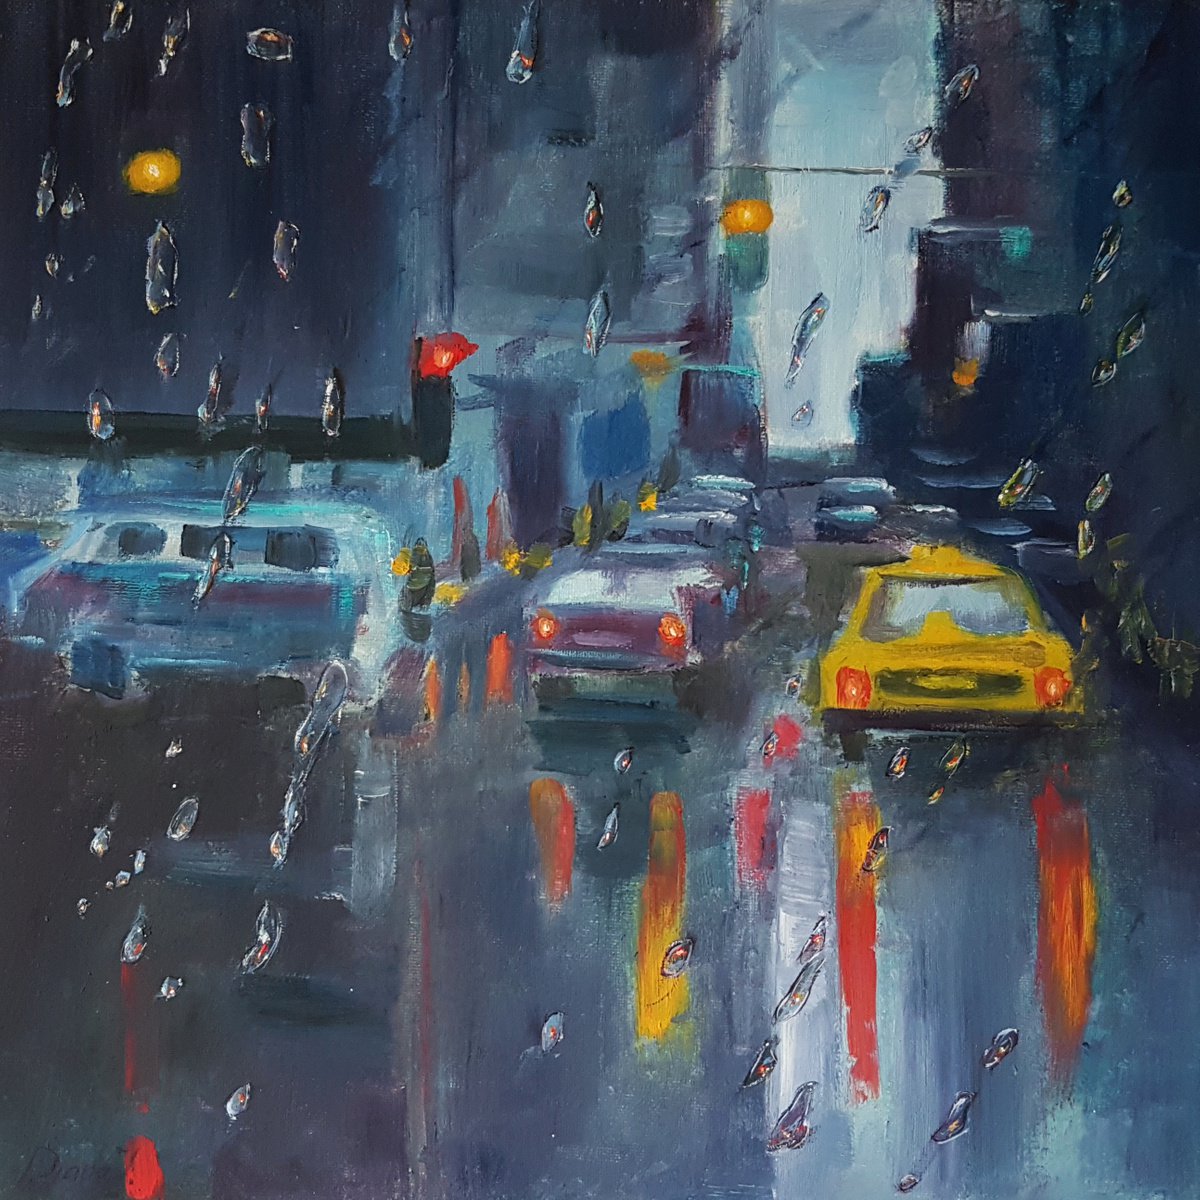 The City In Rain by Diana Janson